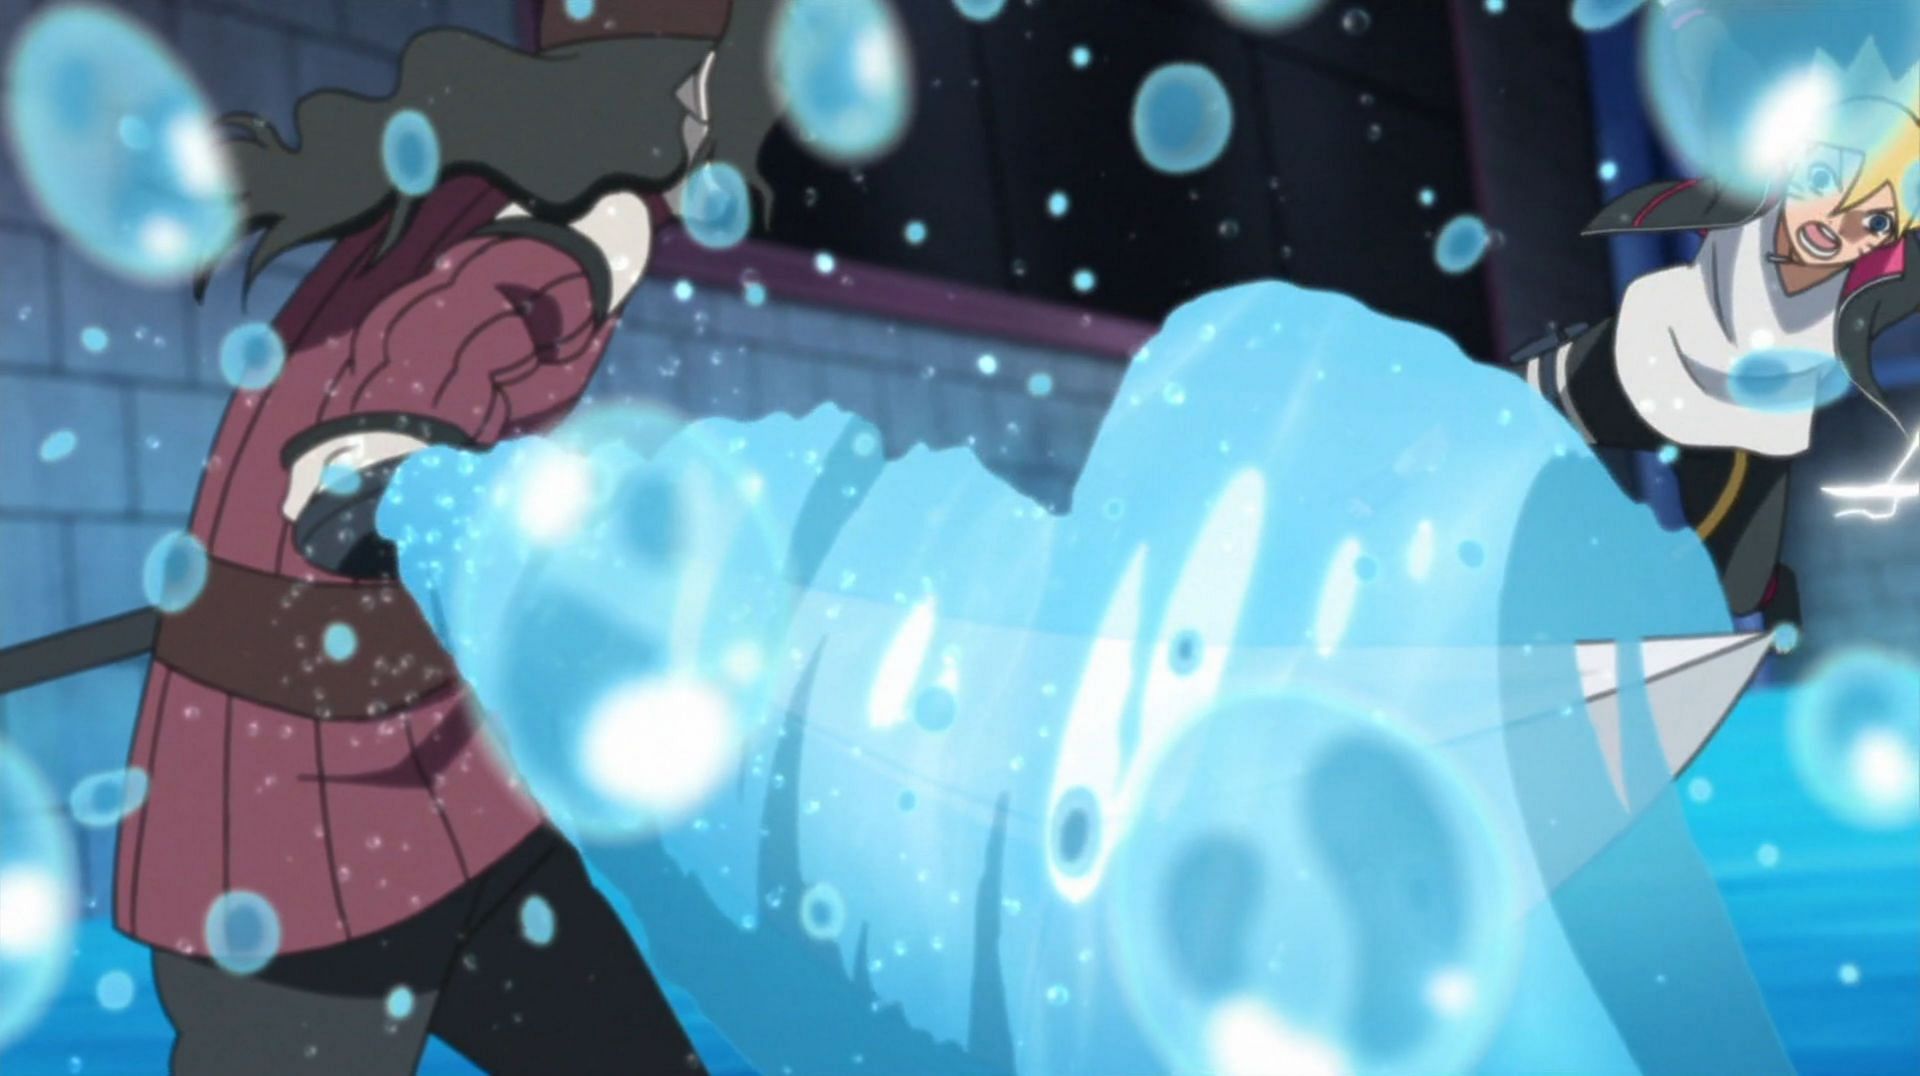 The Water Release: Water Forge Technique being used in the &#039;Boruto&#039; anime (Image via Studio Pierrot)